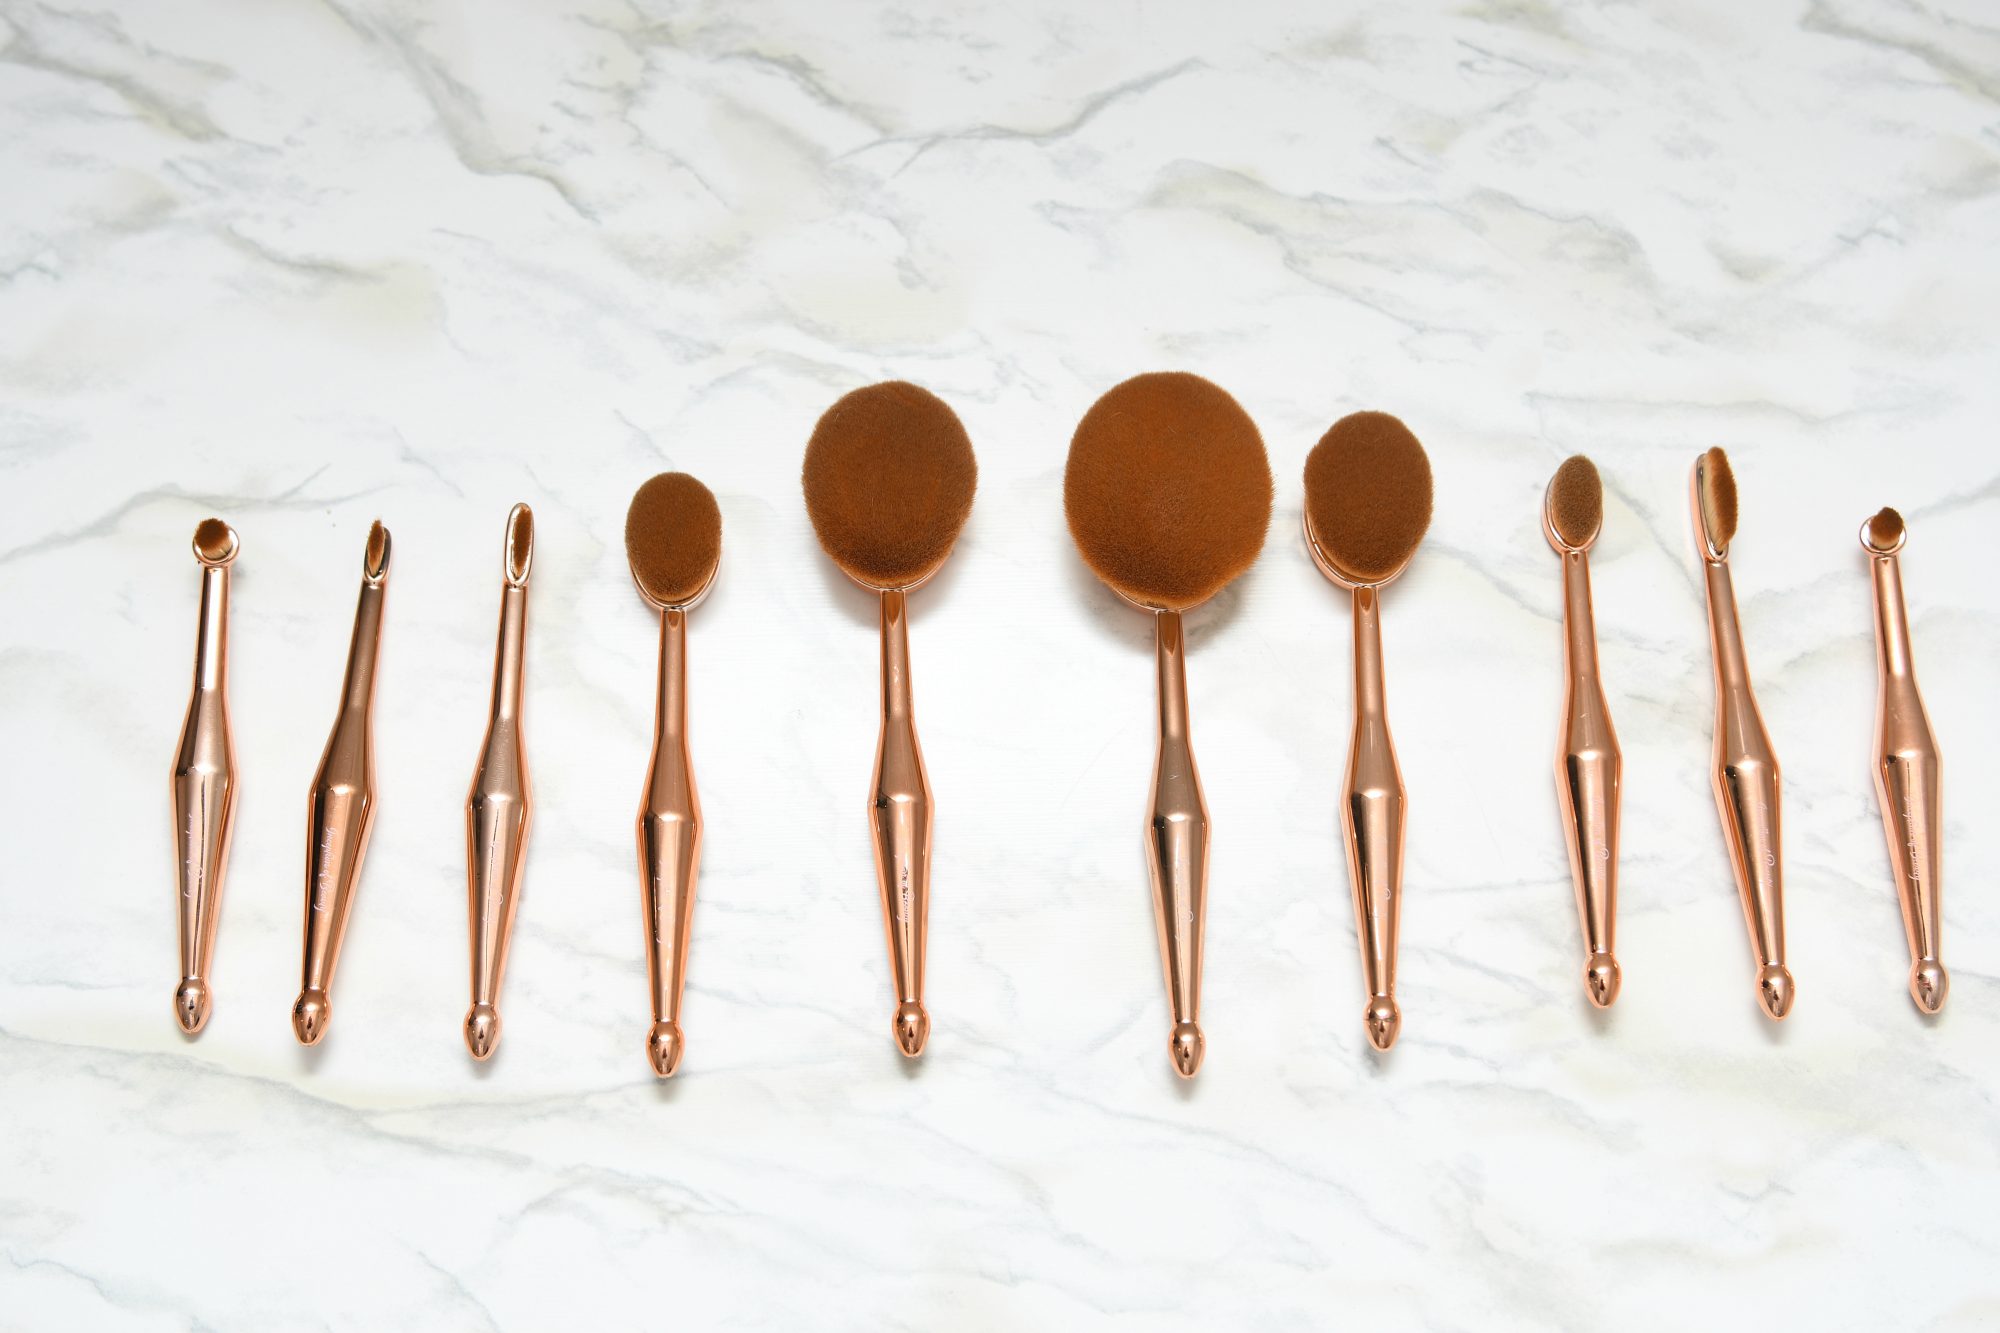 how to clean oval makeup brushes